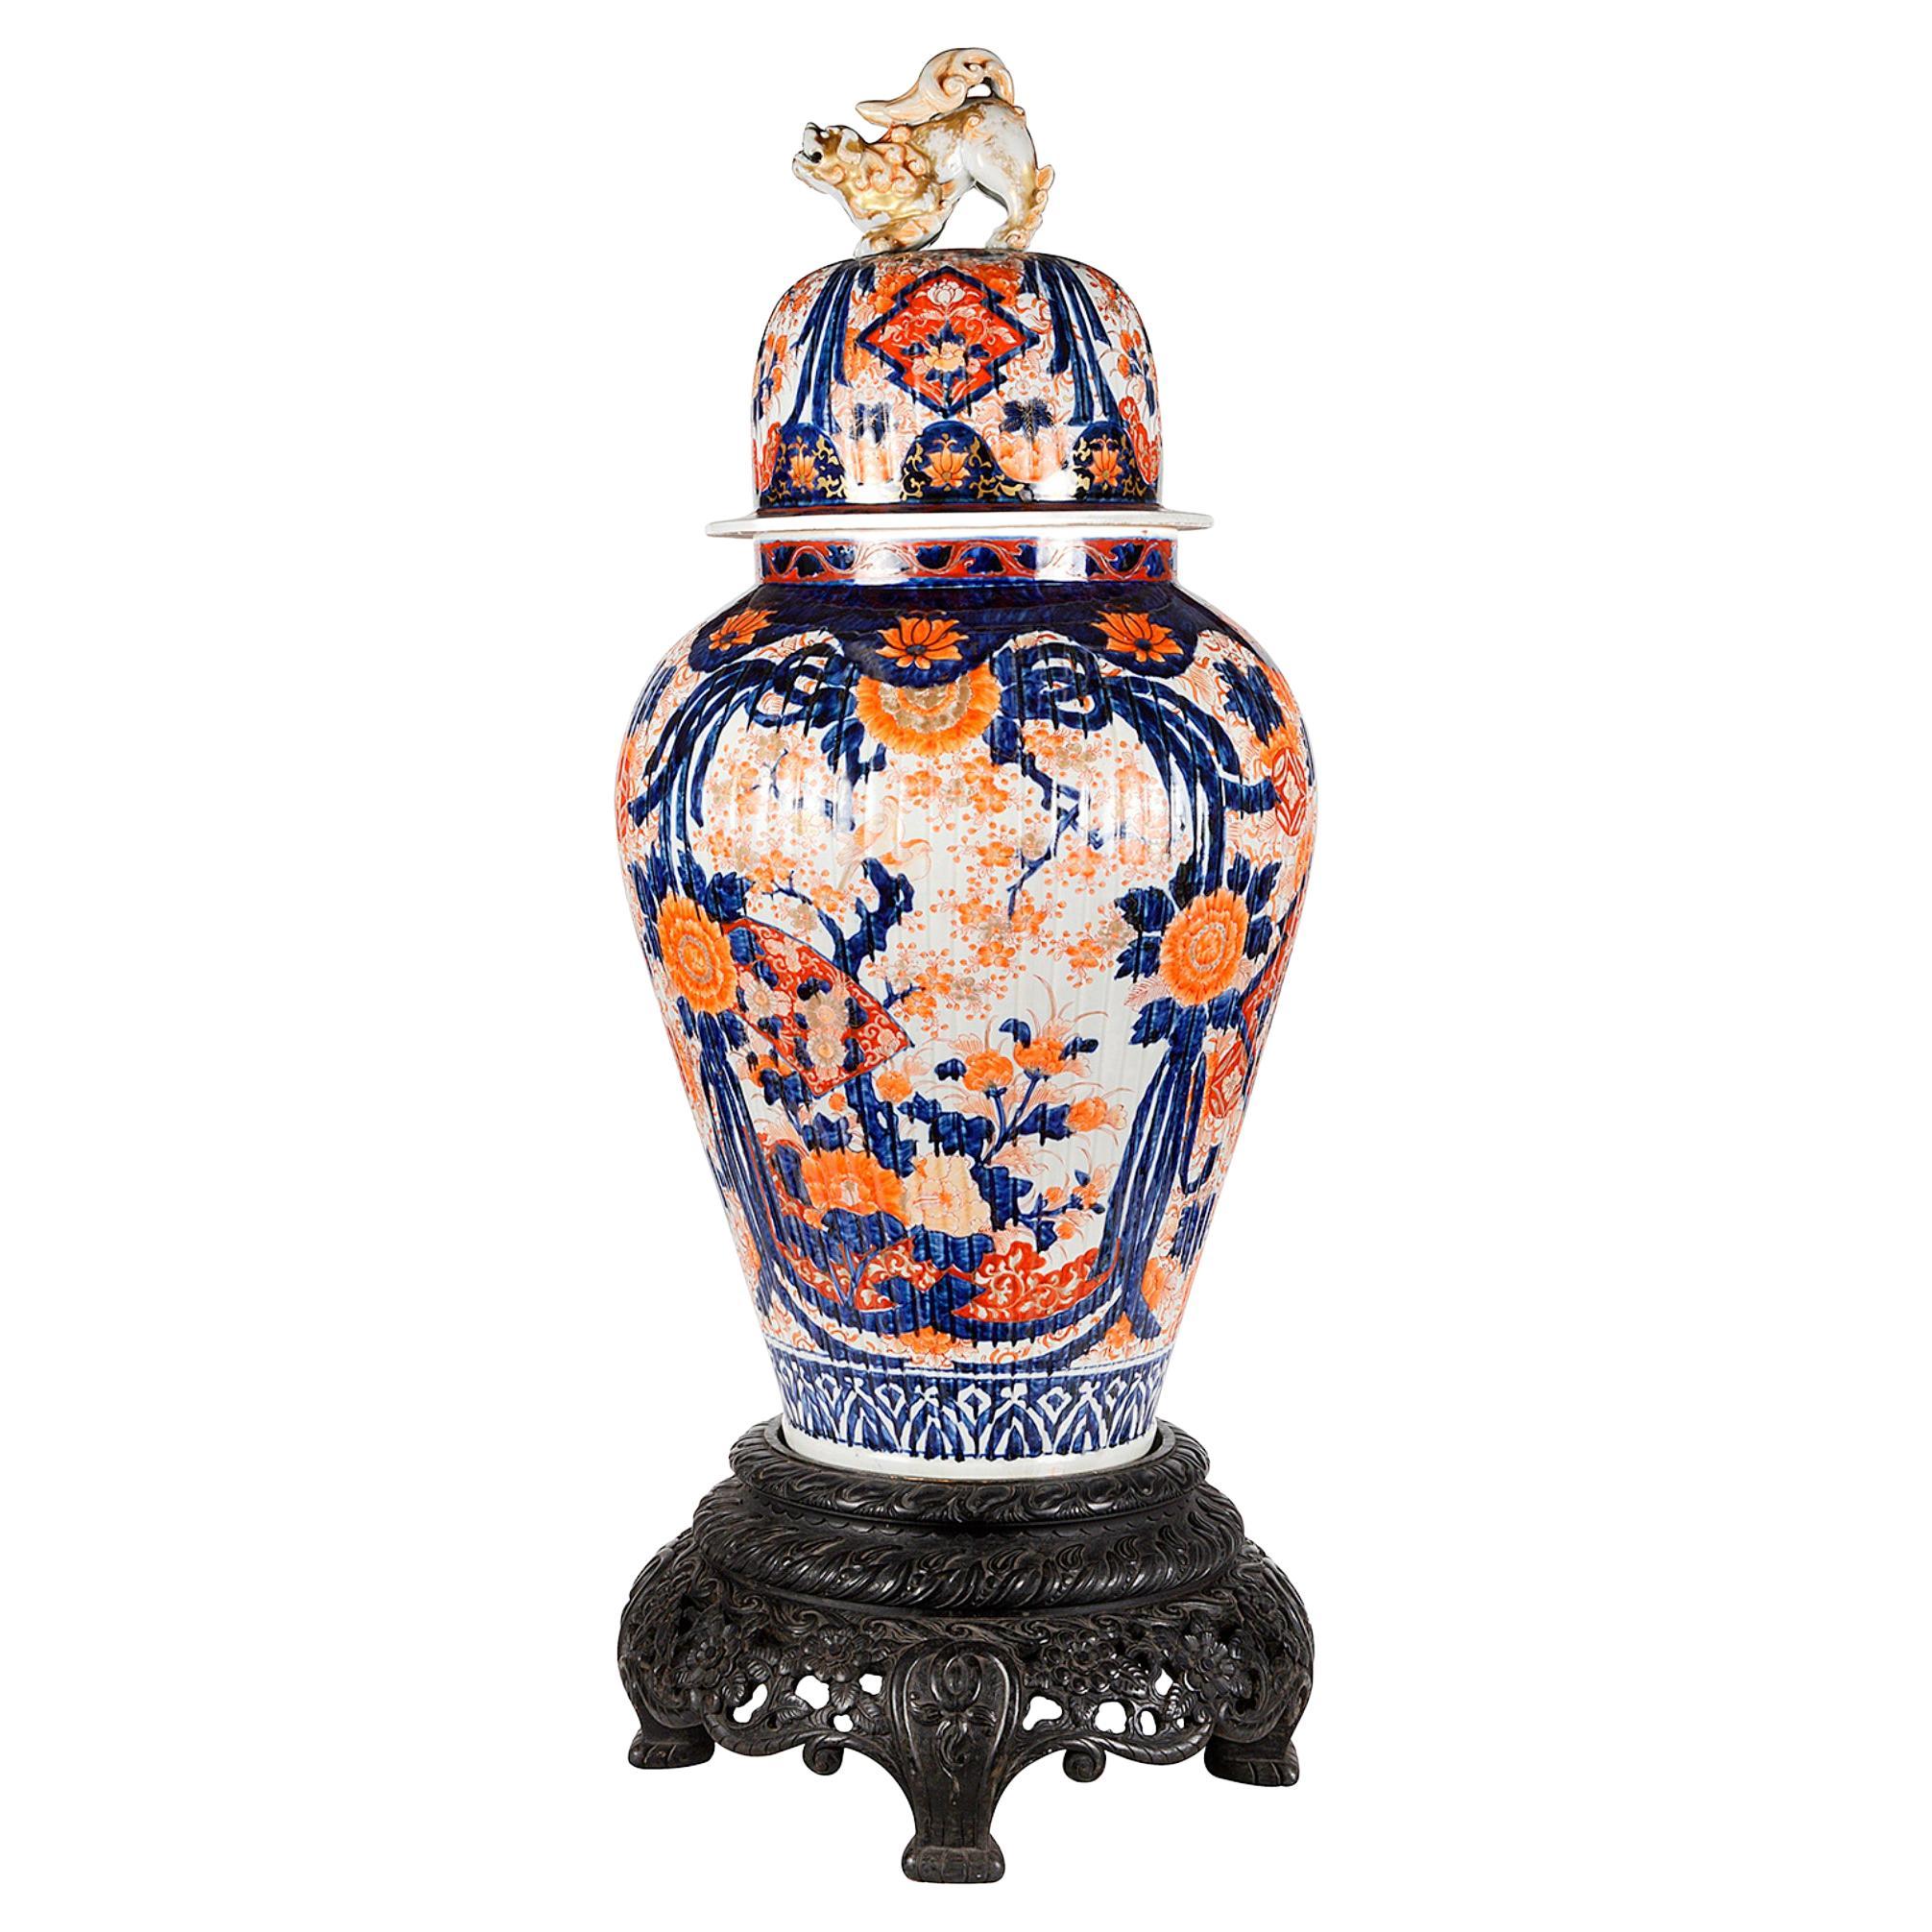 Large 19th Century Japanese Imari Vase on Stand For Sale at 1stDibs